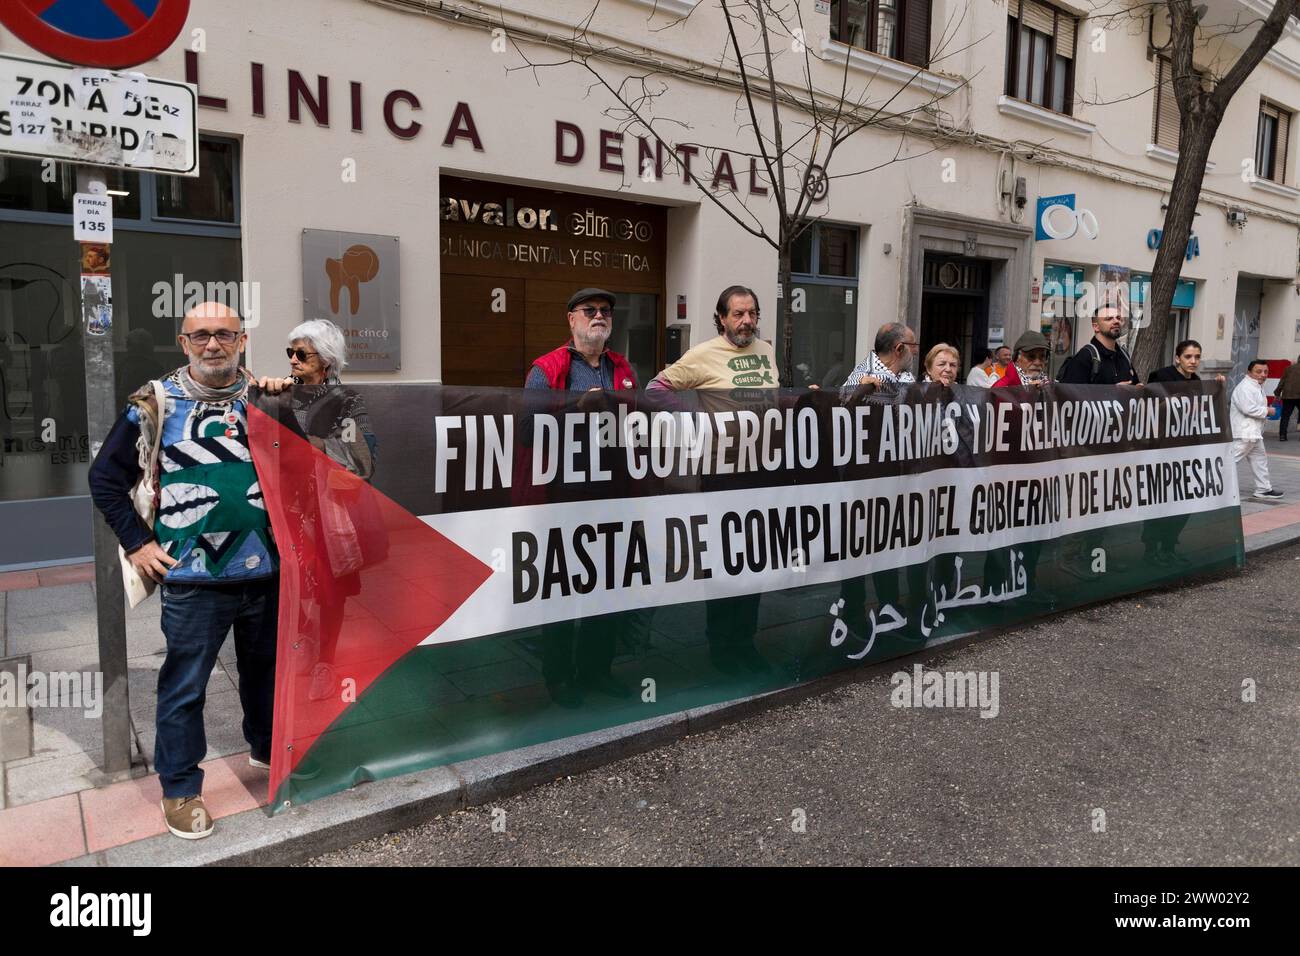 Pro-Palestine activists hold a banner during a demonstration in front of the headquarters of the PSOE (Spanish Socialist Workers Party), the official party of the Spanish government, in Madrid to demand an end to arms sales to Israel. Protesters from the Solidarity Network against the Occupation of Palestine in Spain delivered a petition demanding an end to the arms trade between Spain and Israel and a bouquet of black roses, addressed to Pedro Sanchez, President of the Government of Spain and general secretary of the PSOE (Party Spanish Socialist Workers). (Photo by Luis Soto/SOPA Images/Si Stock Photo